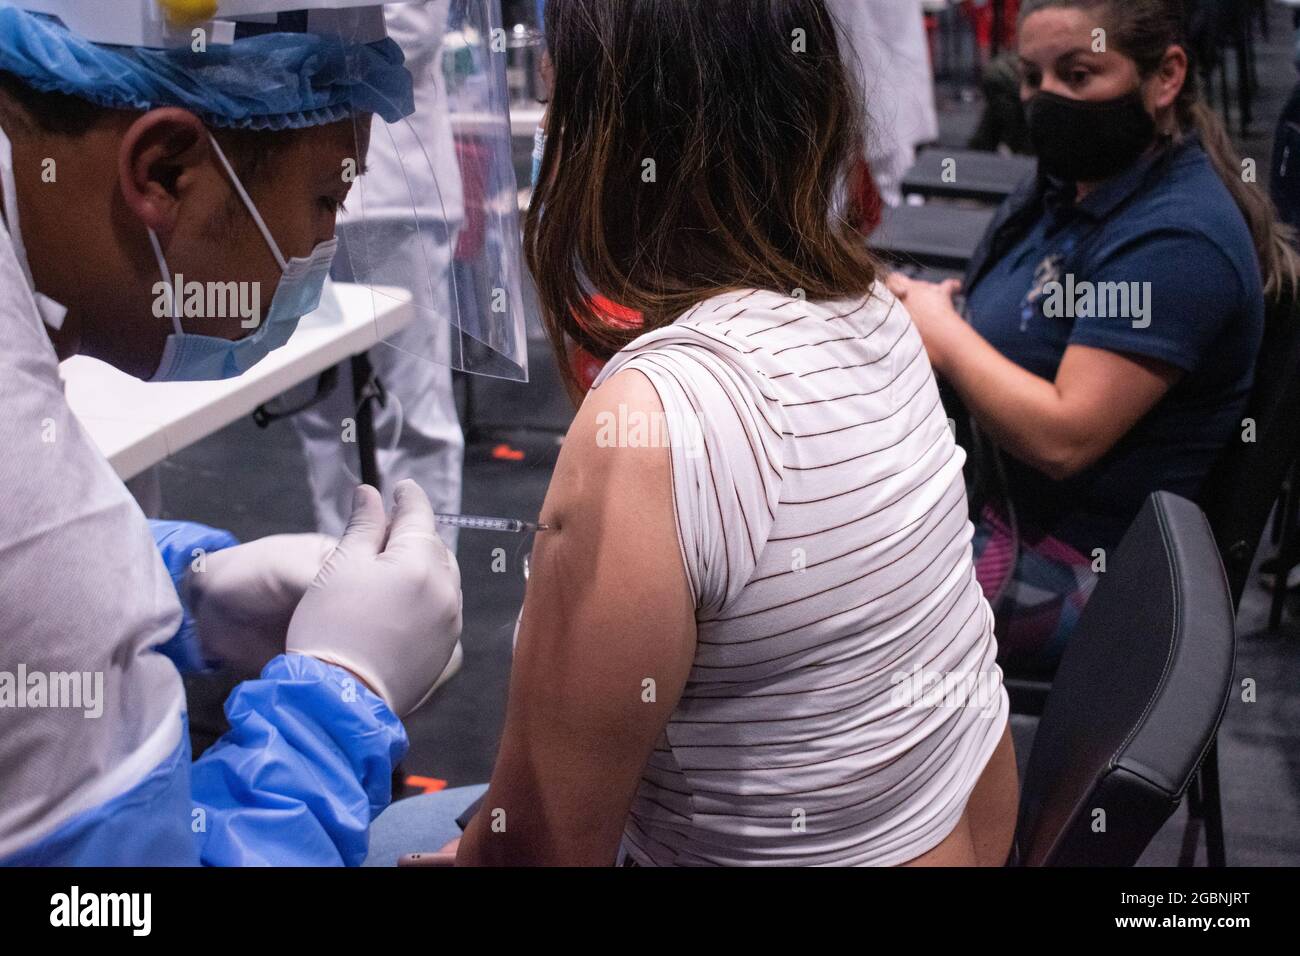 People from ages 25 to 30 start their vaccination phase with the Moderna novel COVID-19 vaccine against the Coronavirus disease in Bogota, Colombia on August 3, 2021. Stock Photo